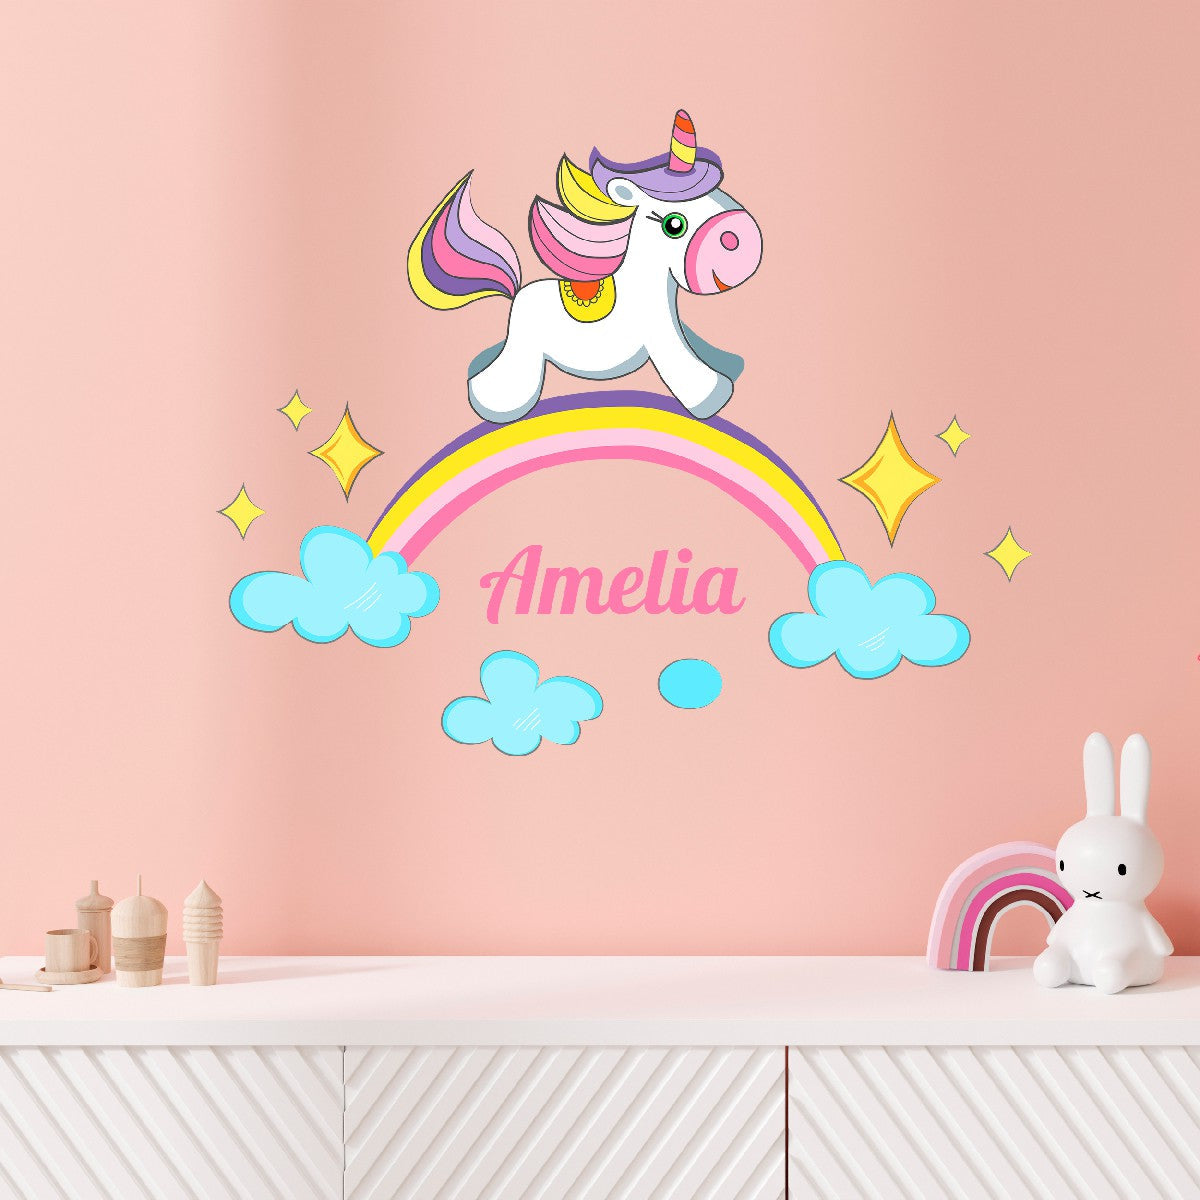 Personalized Unicorn Wall Decals - Customize Your Child's room with Custom Colored Unicorn Designs - Decor your Nursery with Cute Unicorn Sticker Wall Decal